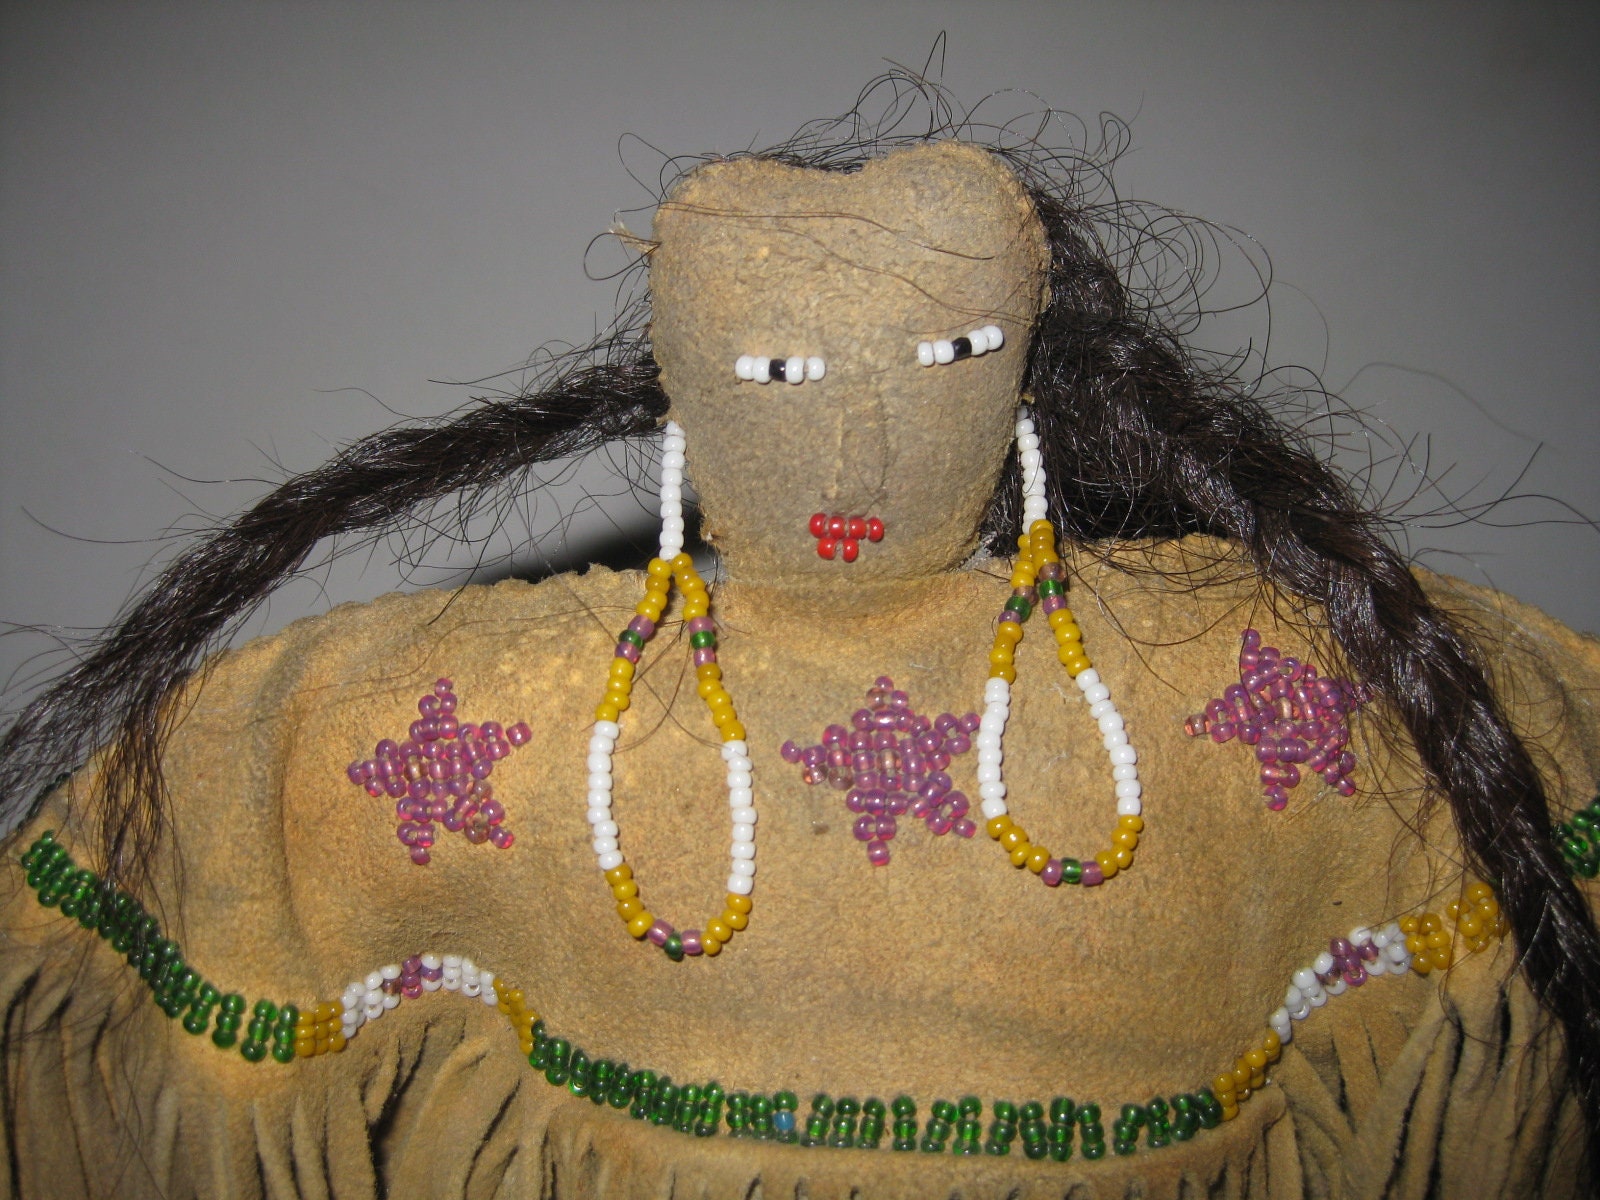 unbranded, Toys, Vintage Native American Doll Buckskin Clothing Beads 8  Inch Beaded Necklace